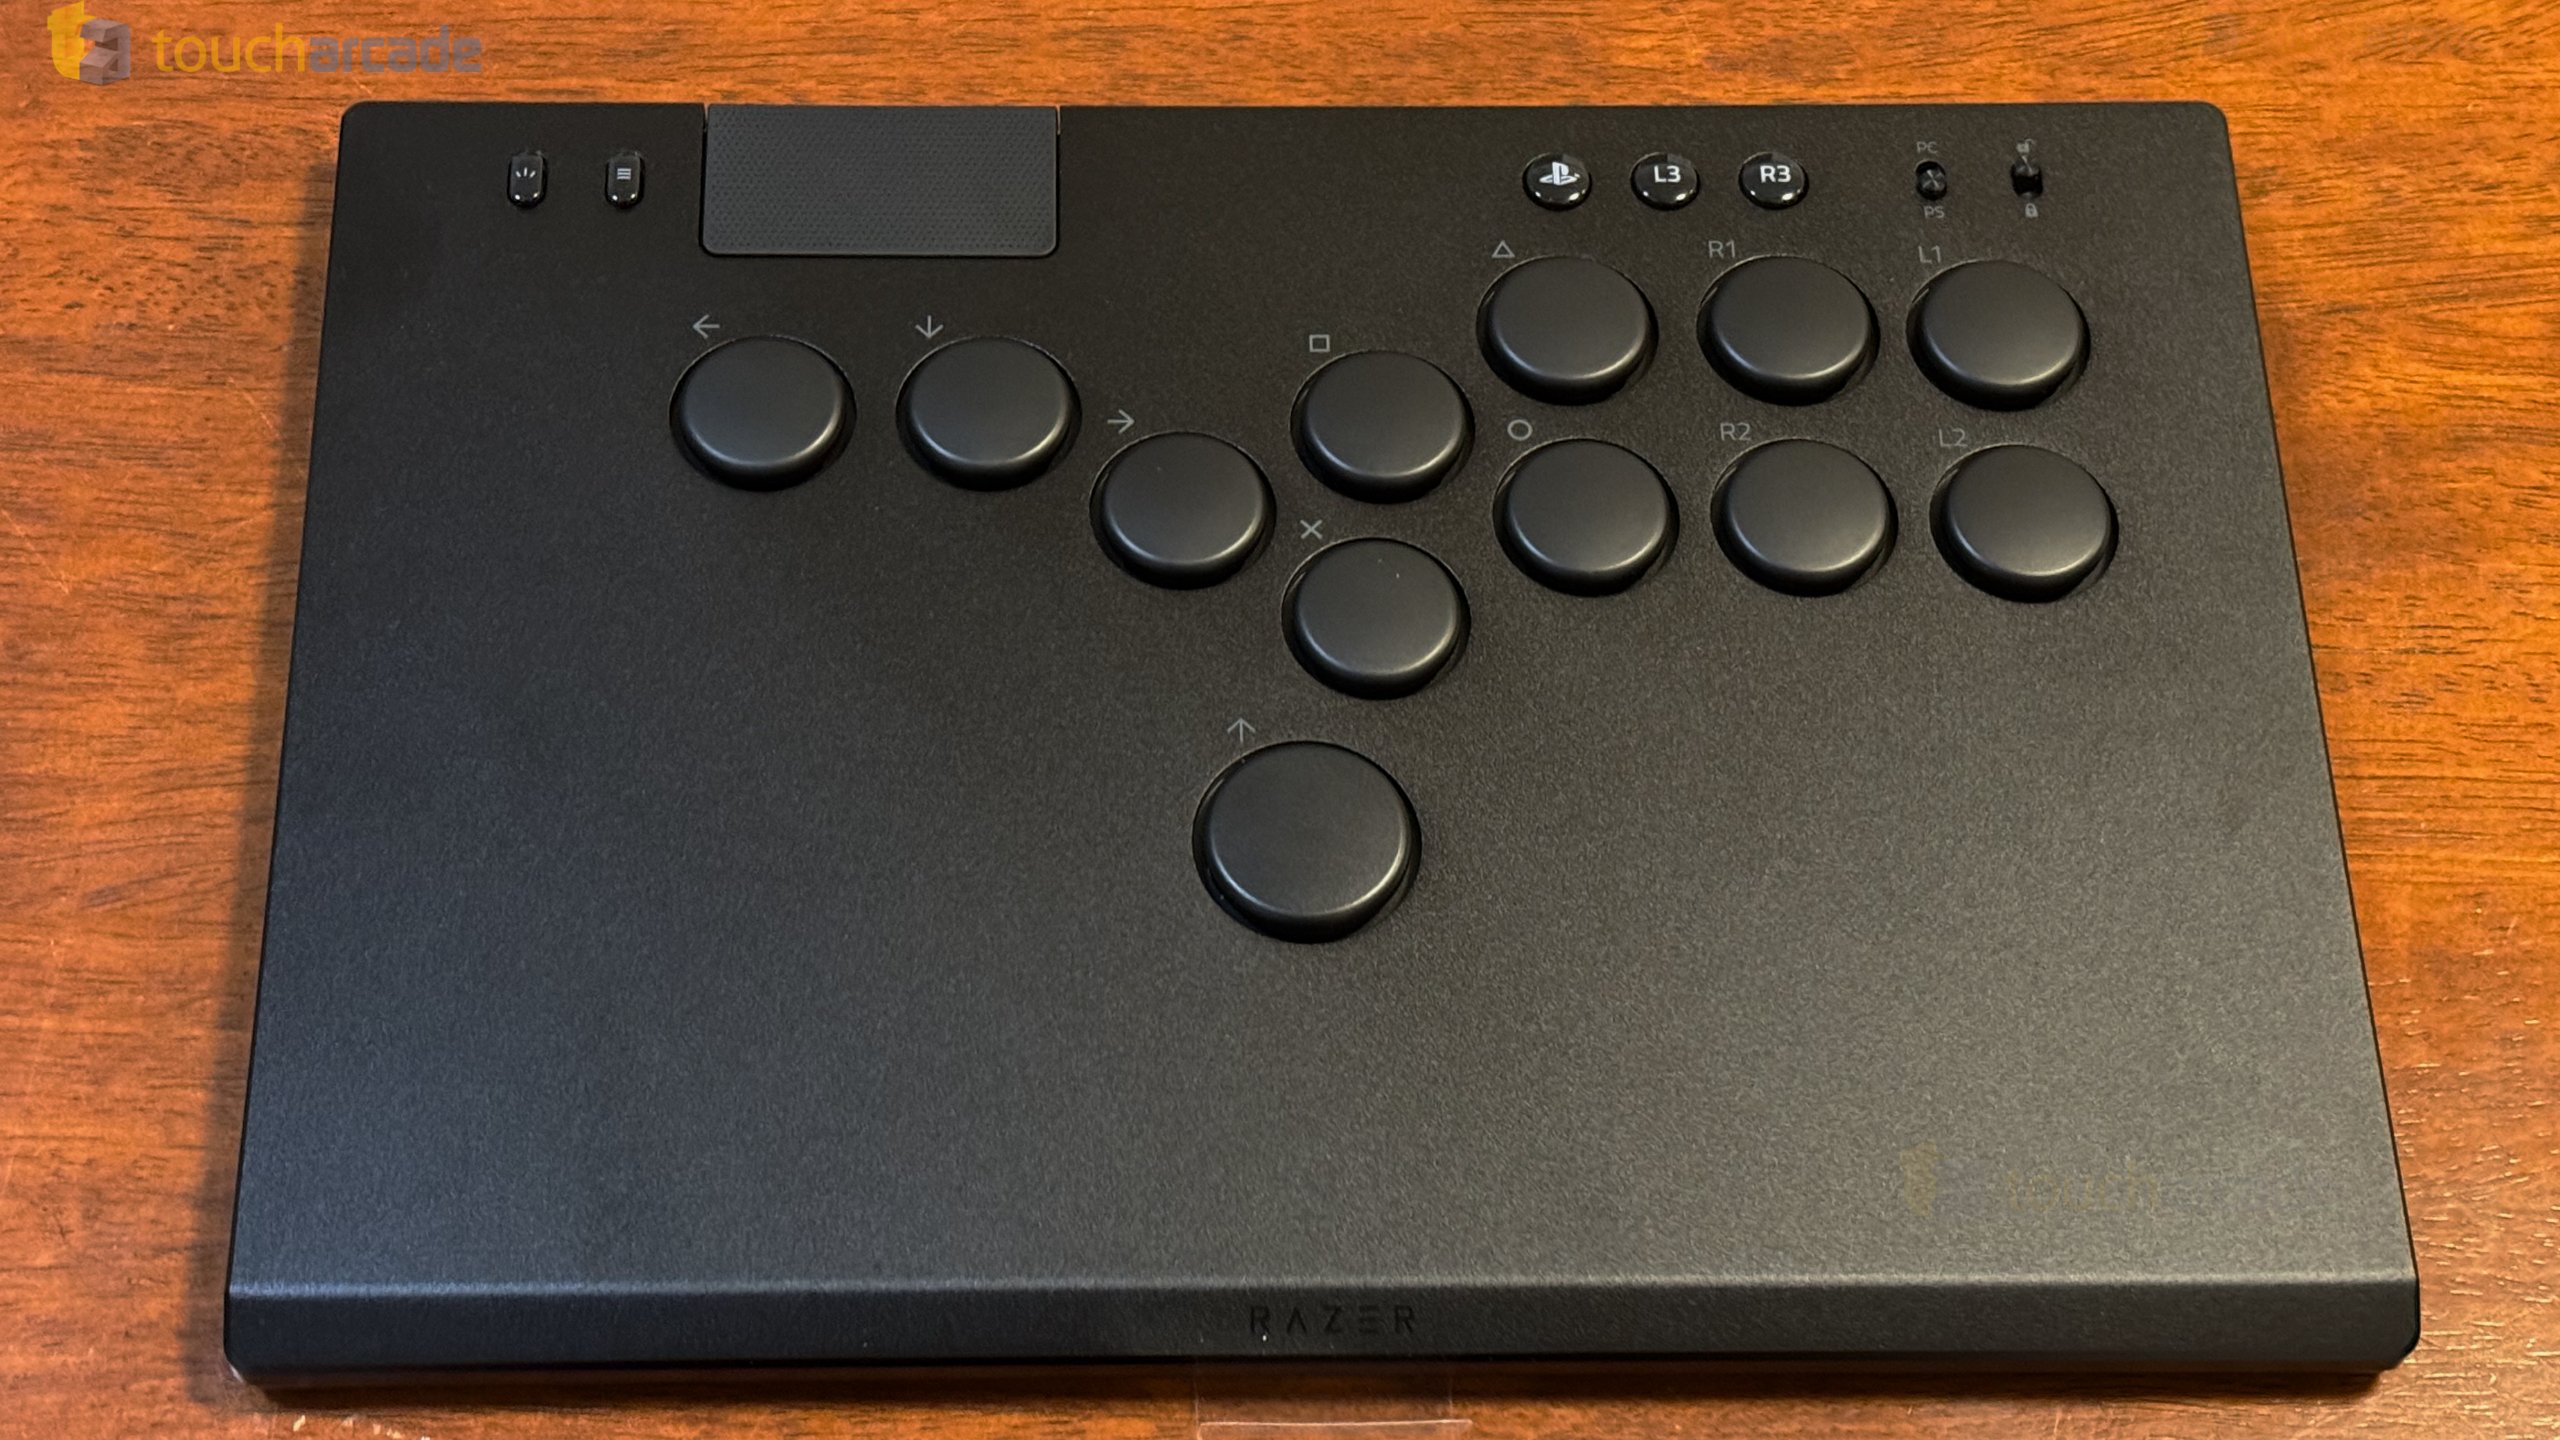 Razer Reveals RGB Kitsune Arcade Controller Just In Time For Street Fighter  6